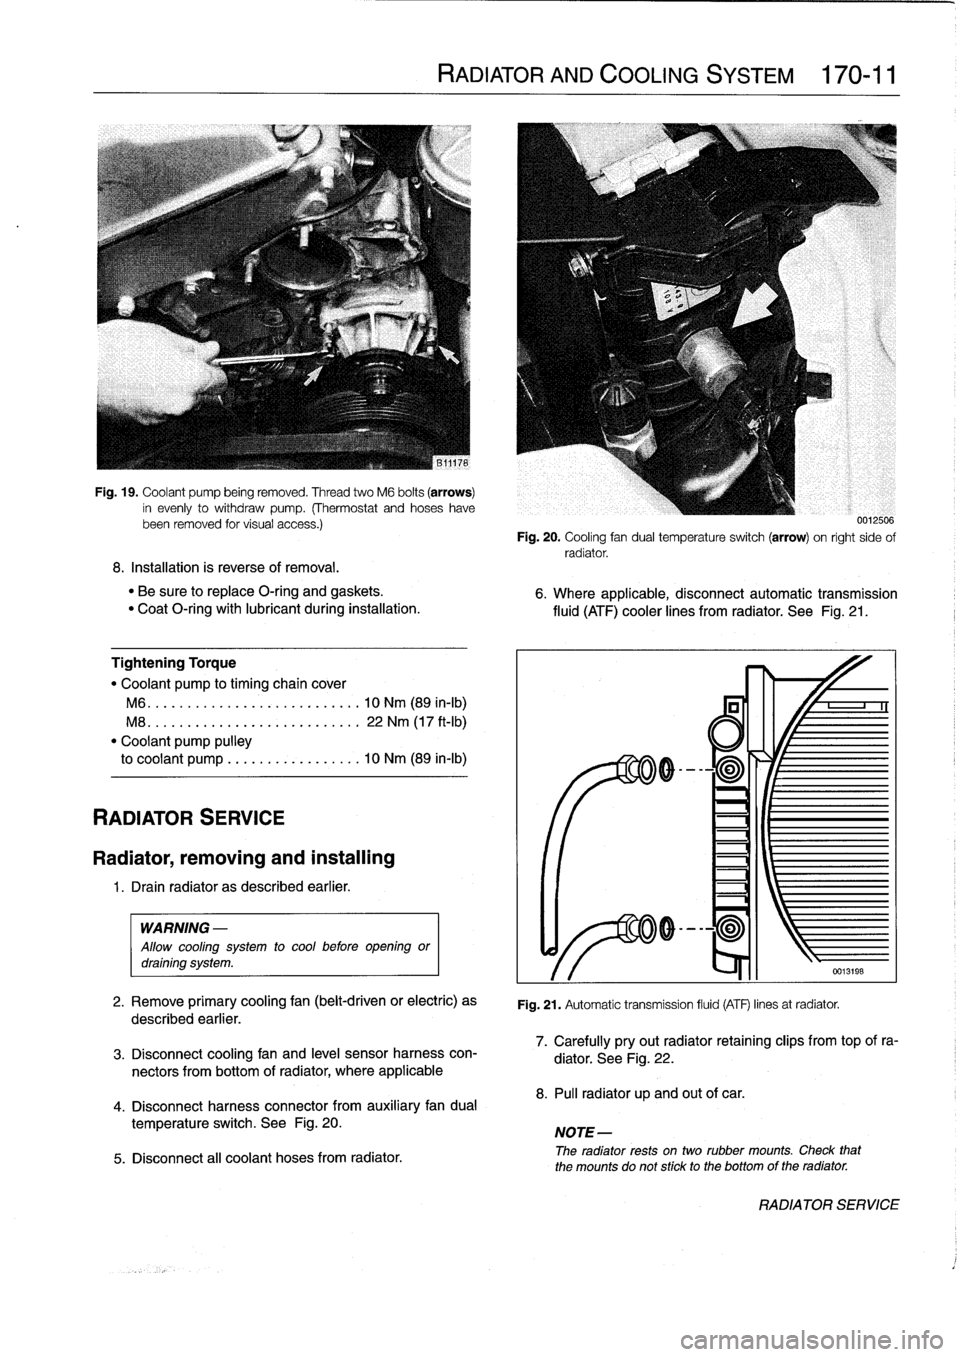 BMW M3 1994 E36 Workshop Manual 
Fig
.
19
.
Coolant
pump
being
removed
.
Thread
two
M6
bolts
(arrows)
in
evenly
to
withdraw
pump
.
(Thermostat
and
hoseshavebeen
removed
tor
visual
access
.)

8
.
Installation
is
reverse
of
removal
.
